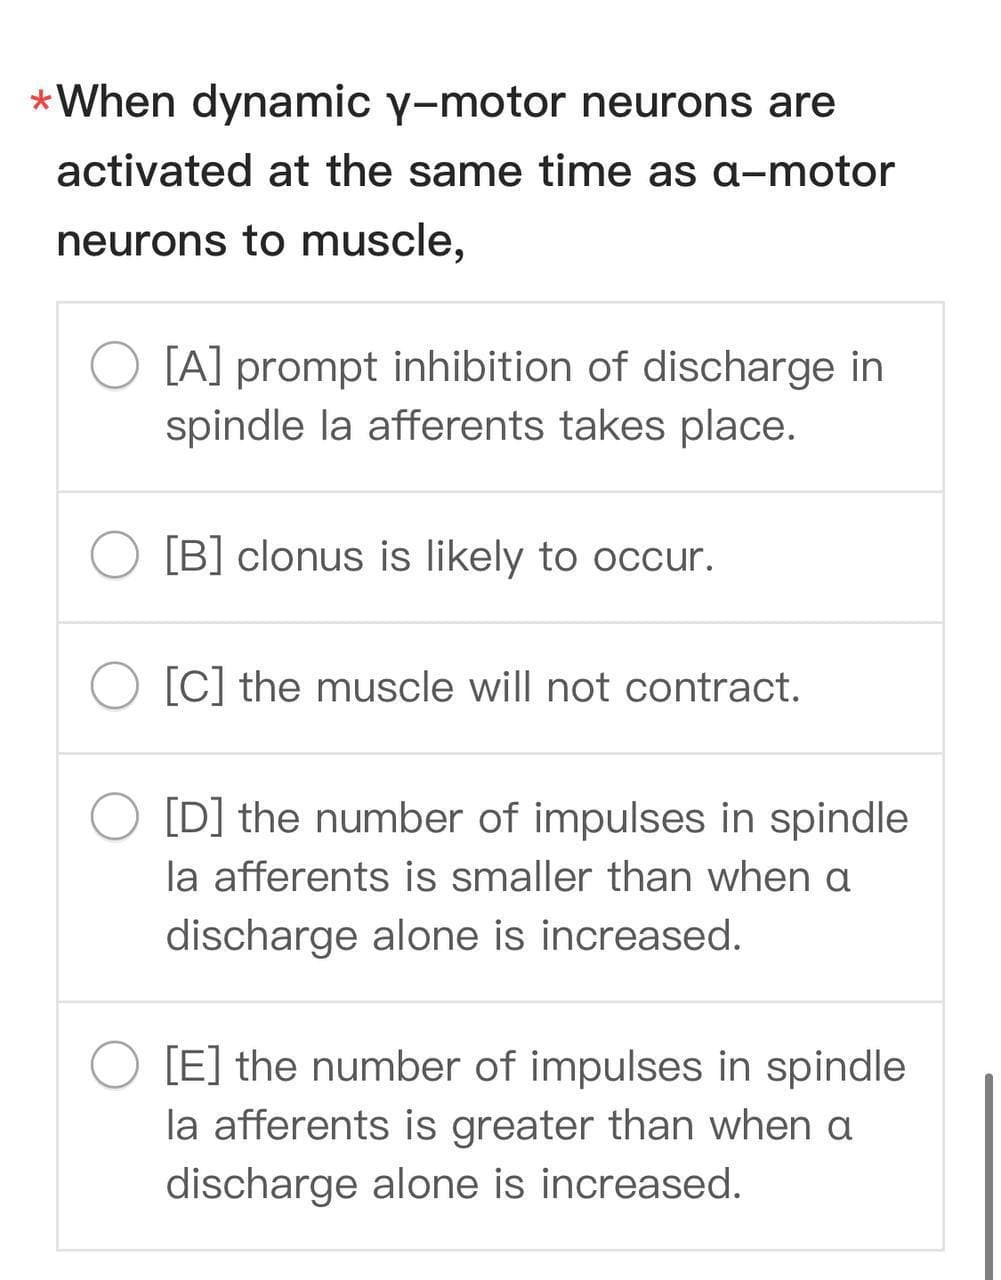 *When dynamic y-motor neurons are
activated at the same time as a-motor
neurons to muscle,
[A] prompt inhibition of discharge in
spindle la afferents takes place.
[B] clonus is likely to occur.
[C] the muscle will not contract.
[D] the number of impulses in spindle
la afferents is smaller than when a
discharge alone is increased.
[E] the number of impulses in spindle
la afferents is greater than when a
discharge alone is increased.